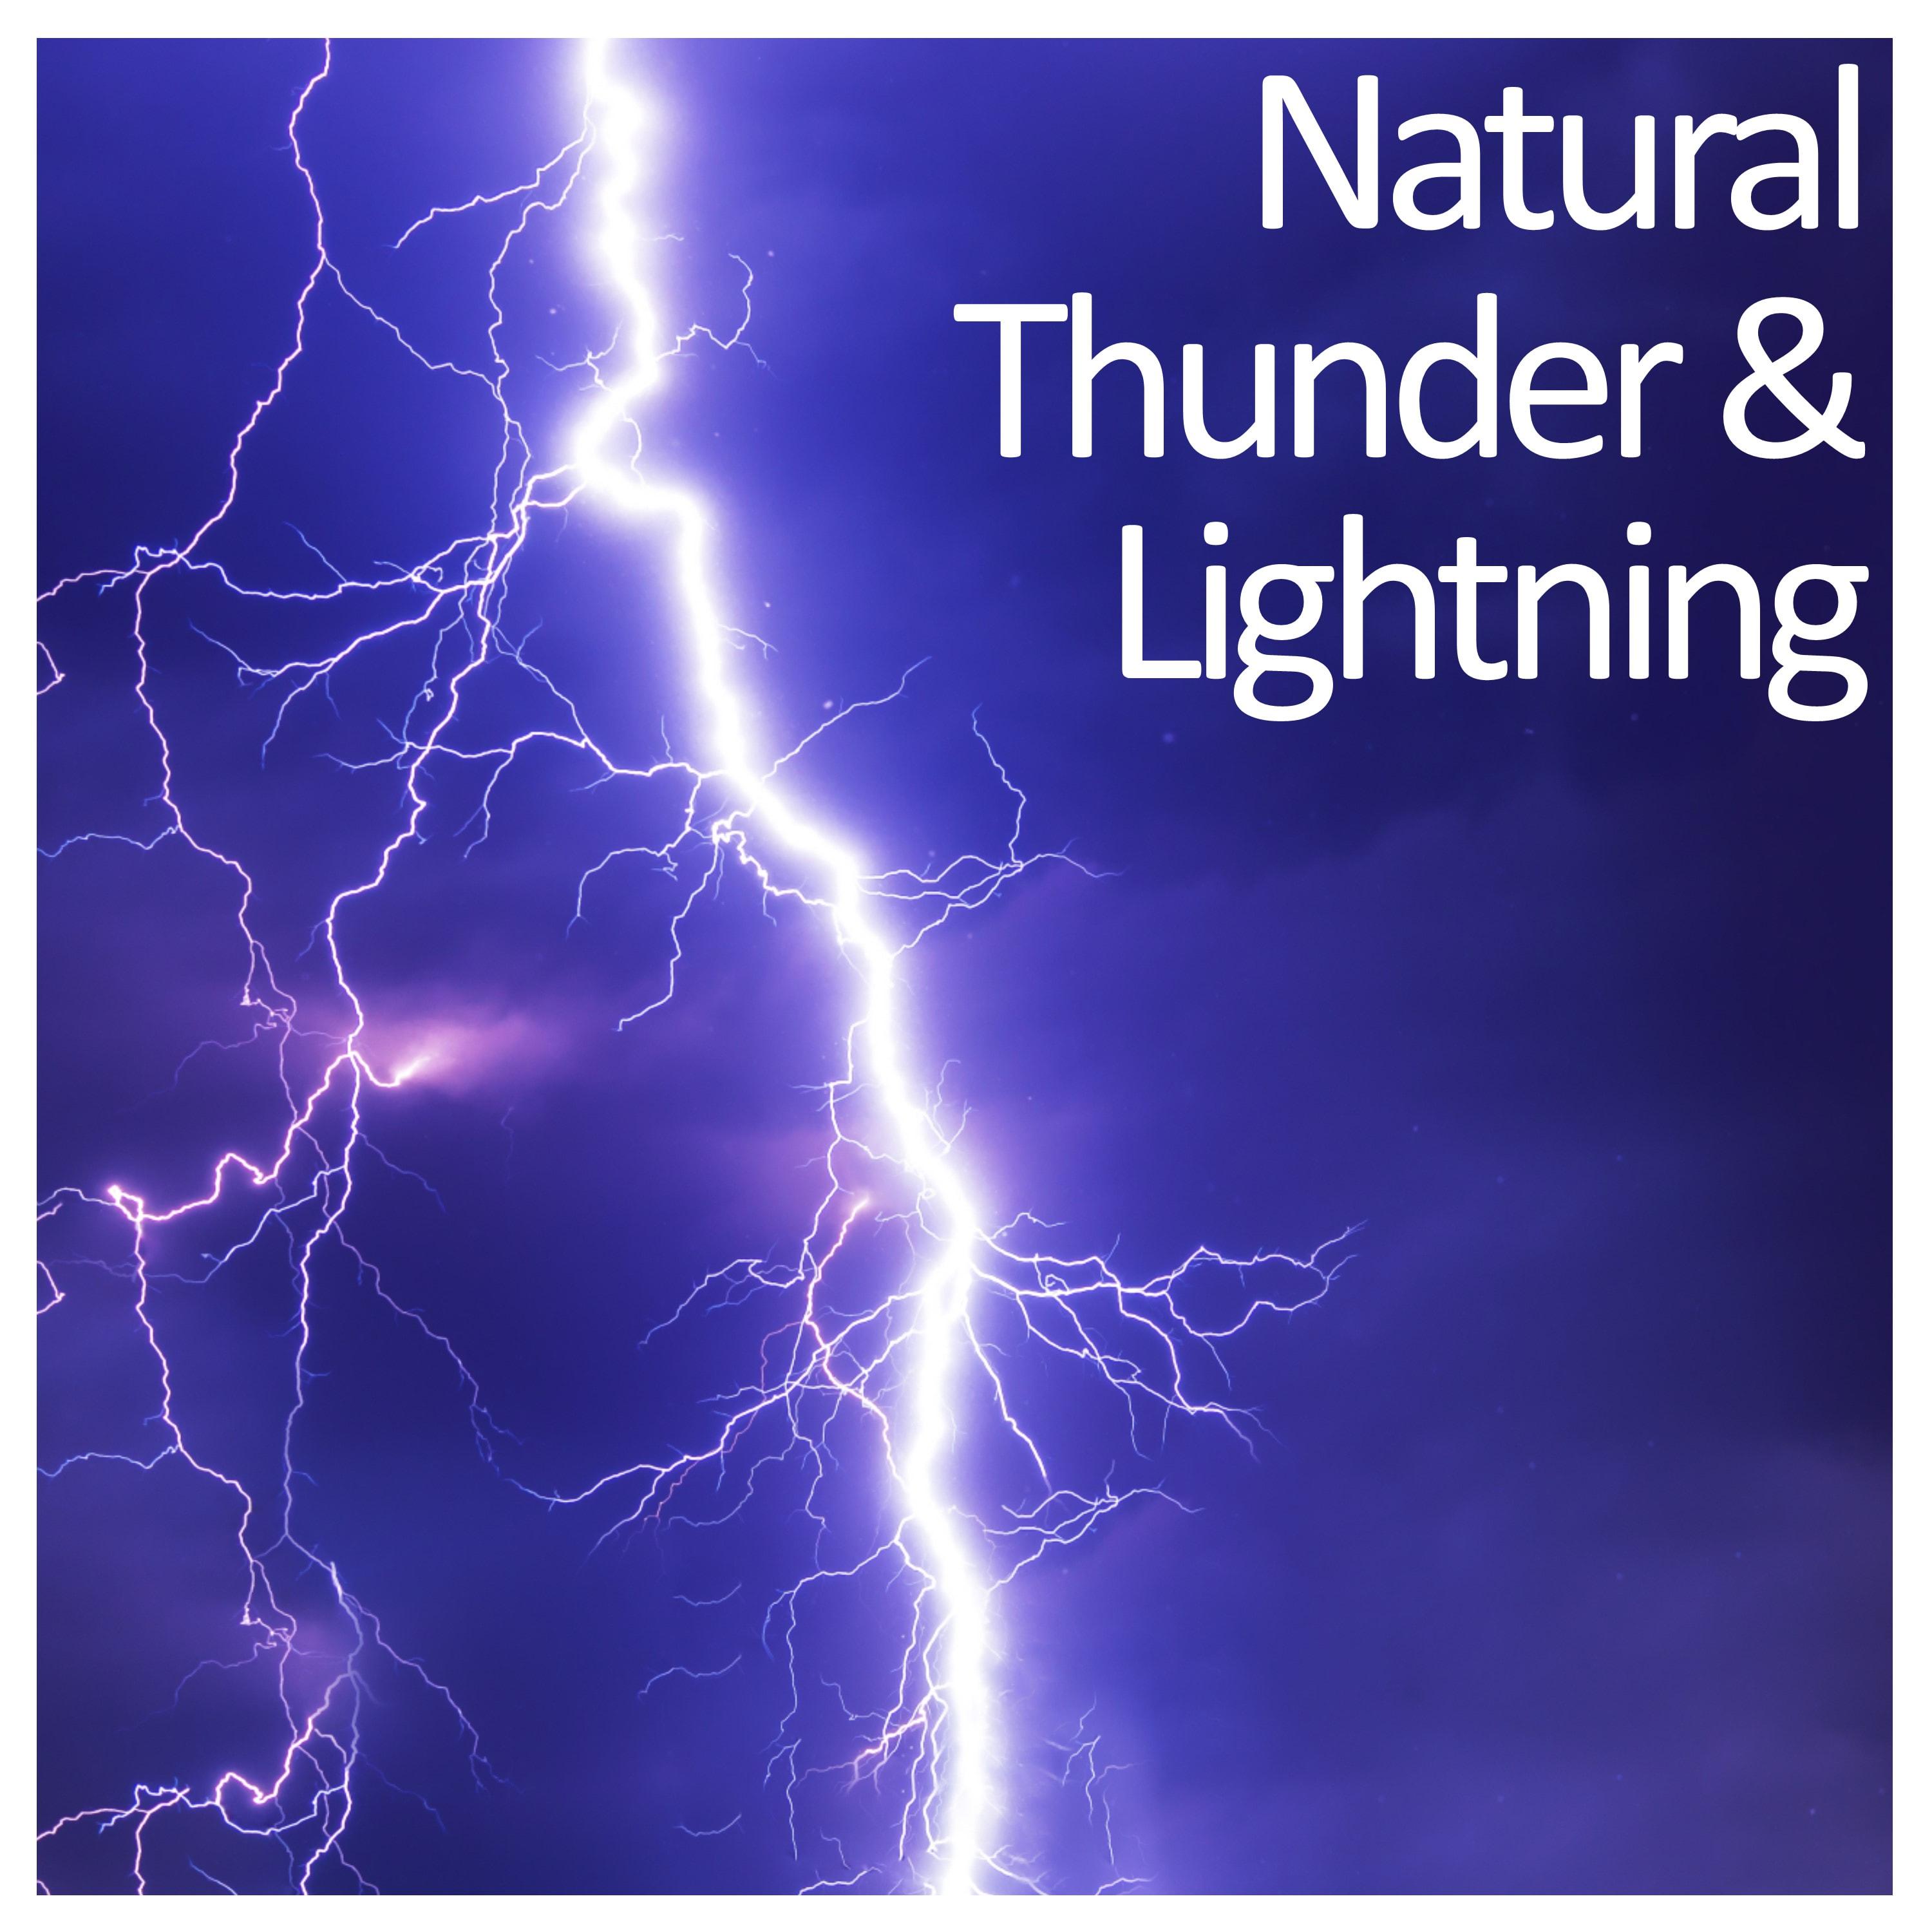 15 Stress Relieving Rain Storms and Rolling Thunder - Perfect Ambient Spa Sounds